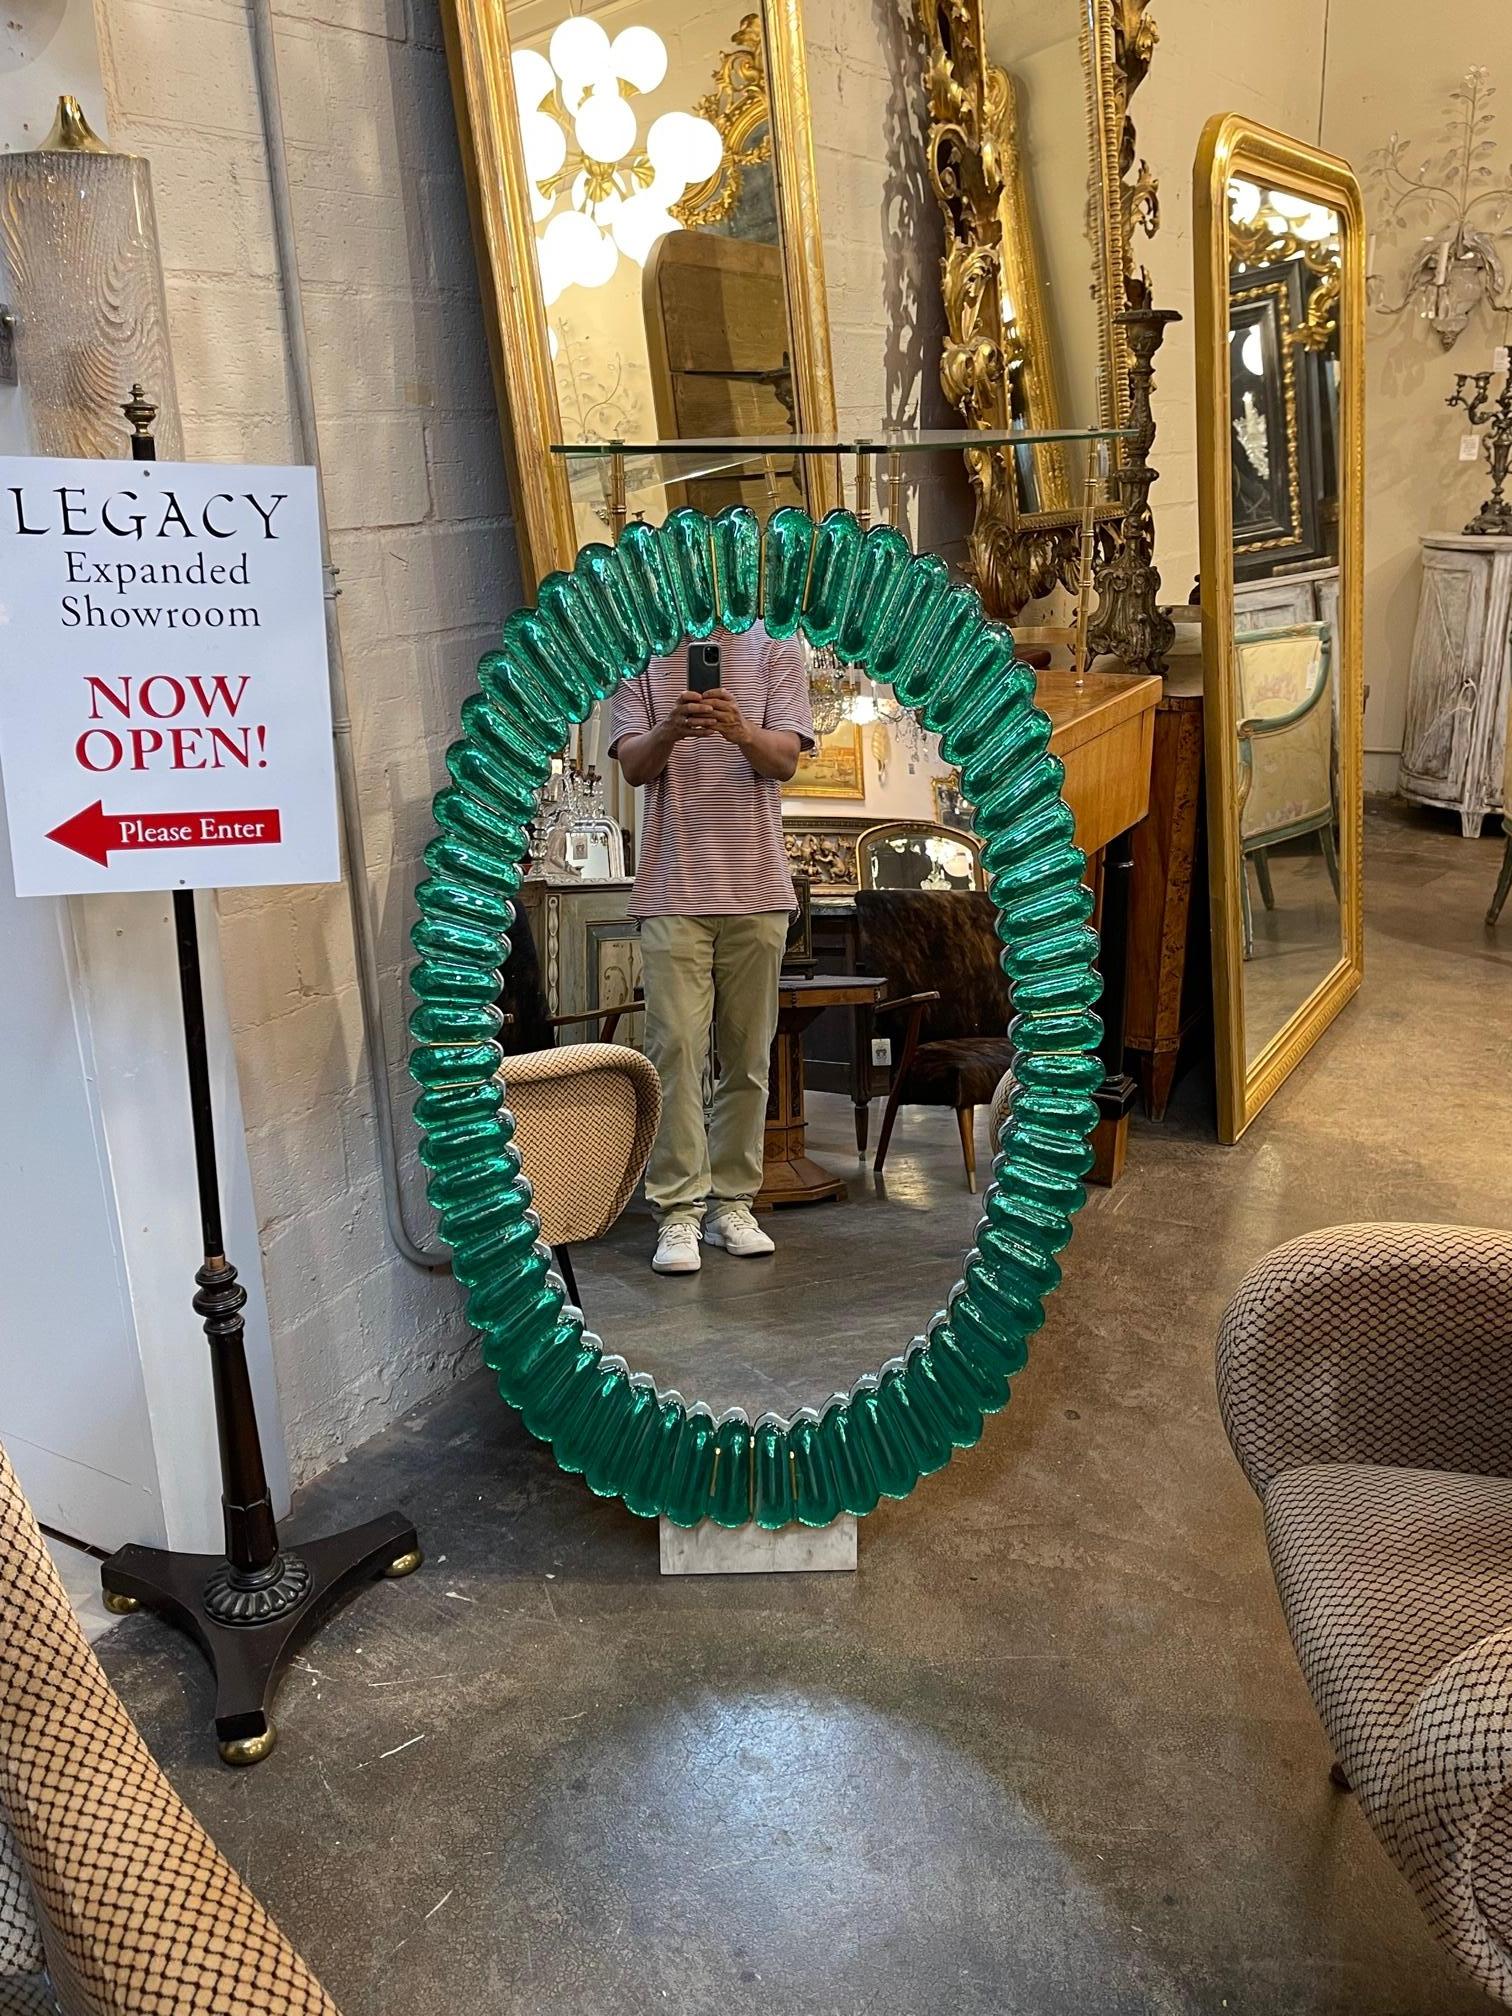 Fabulous Kelly Green Murano glass and brass oval mirror. Makes very bold statement! A real focal point for a beautiful home!